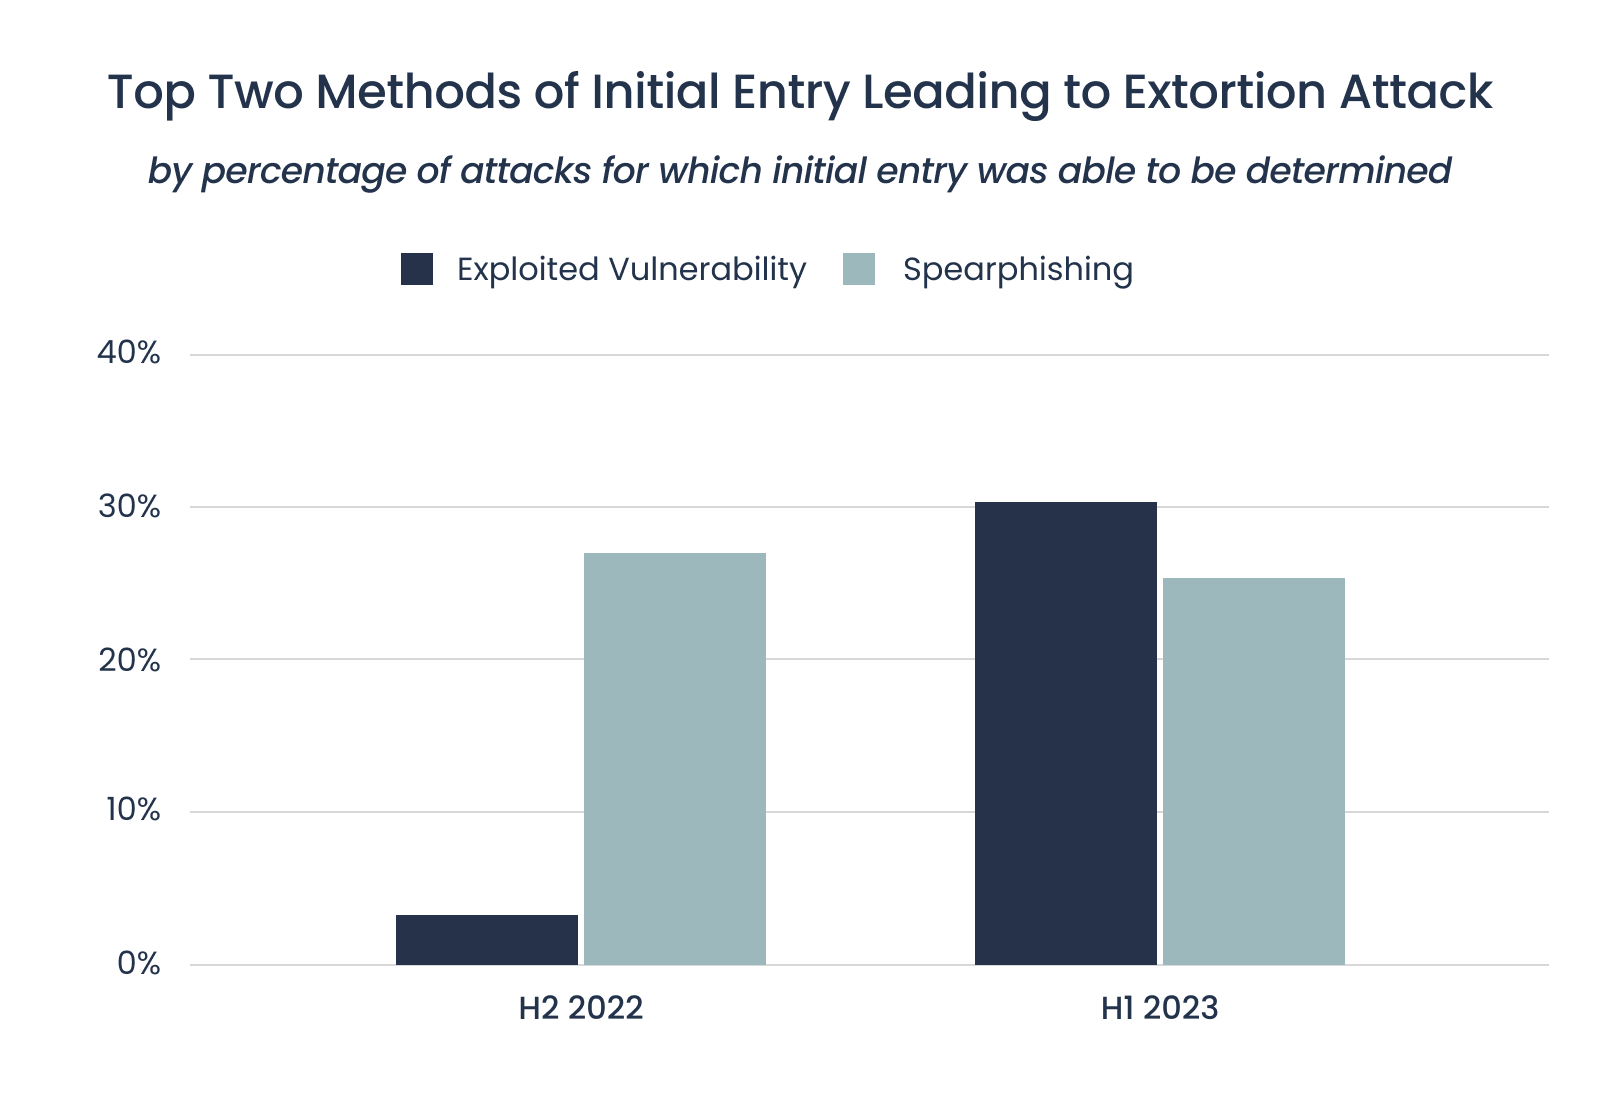 [BAR GRAPH] The two methods of initial entry leading to an extortion attack in H2 2022 and H1 2023